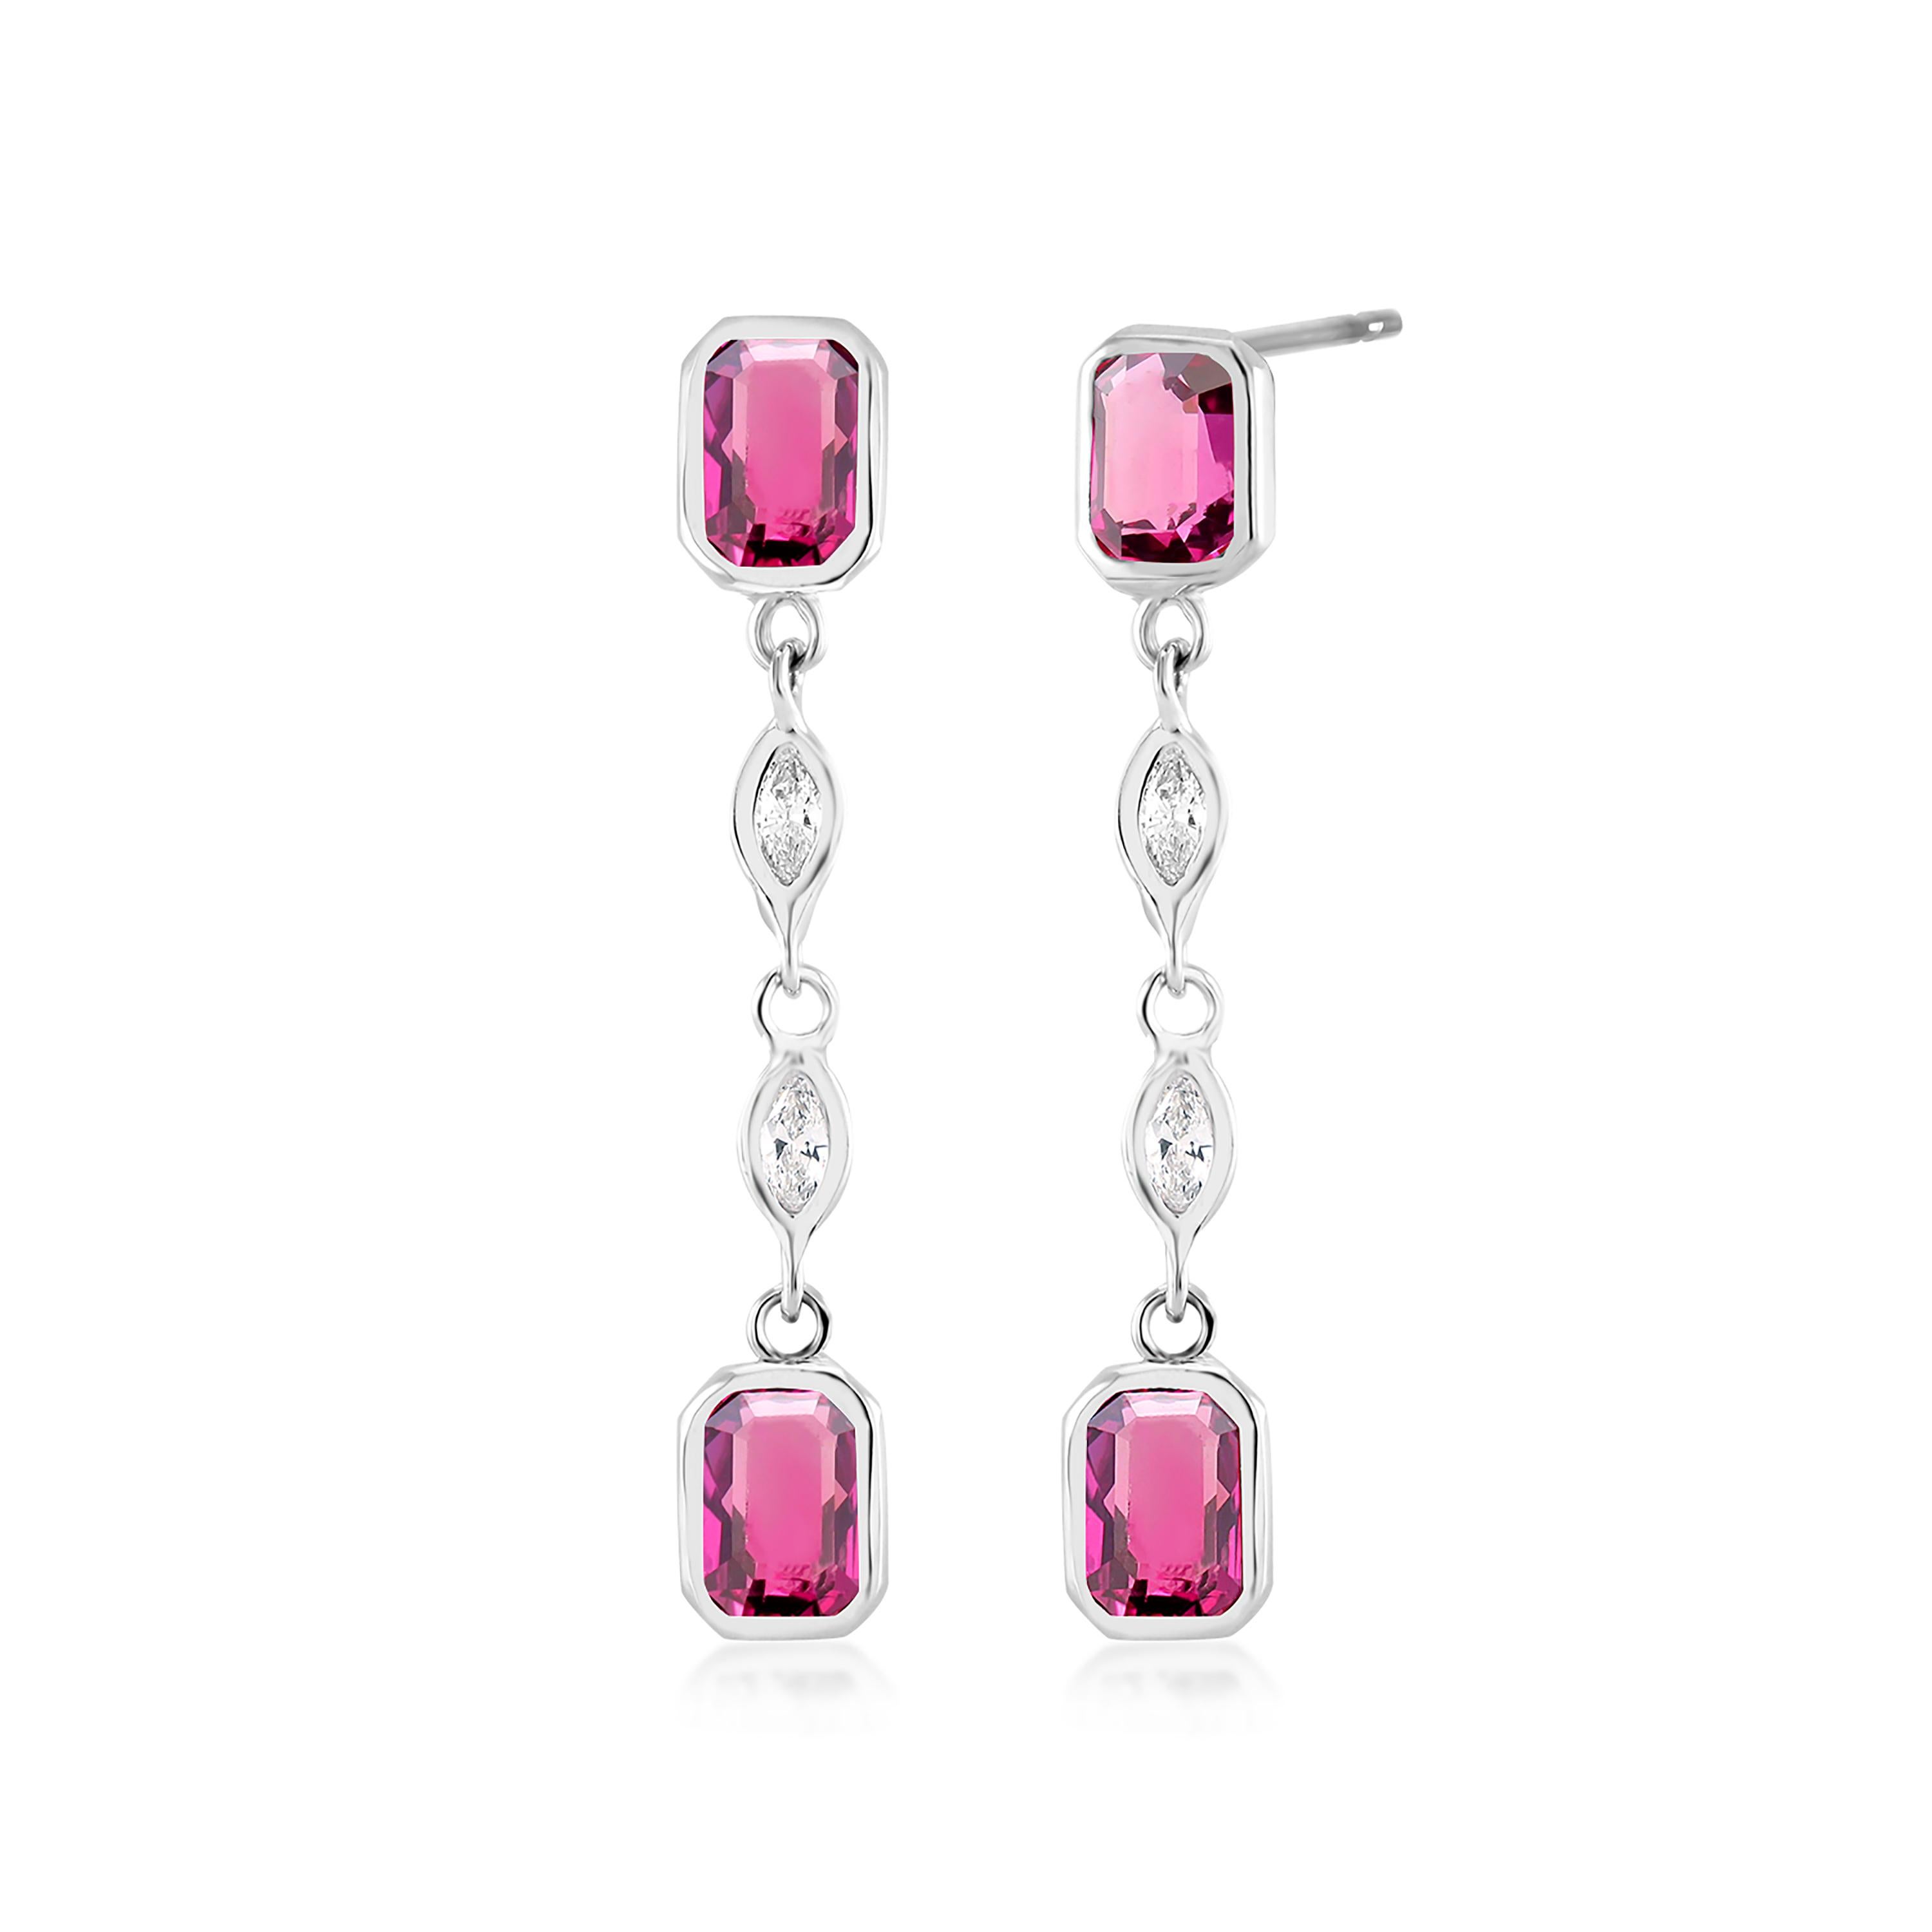 Emerald Cut Four Marquise Diamond and Four Emerald Shaped Ruby Drop Earrings 